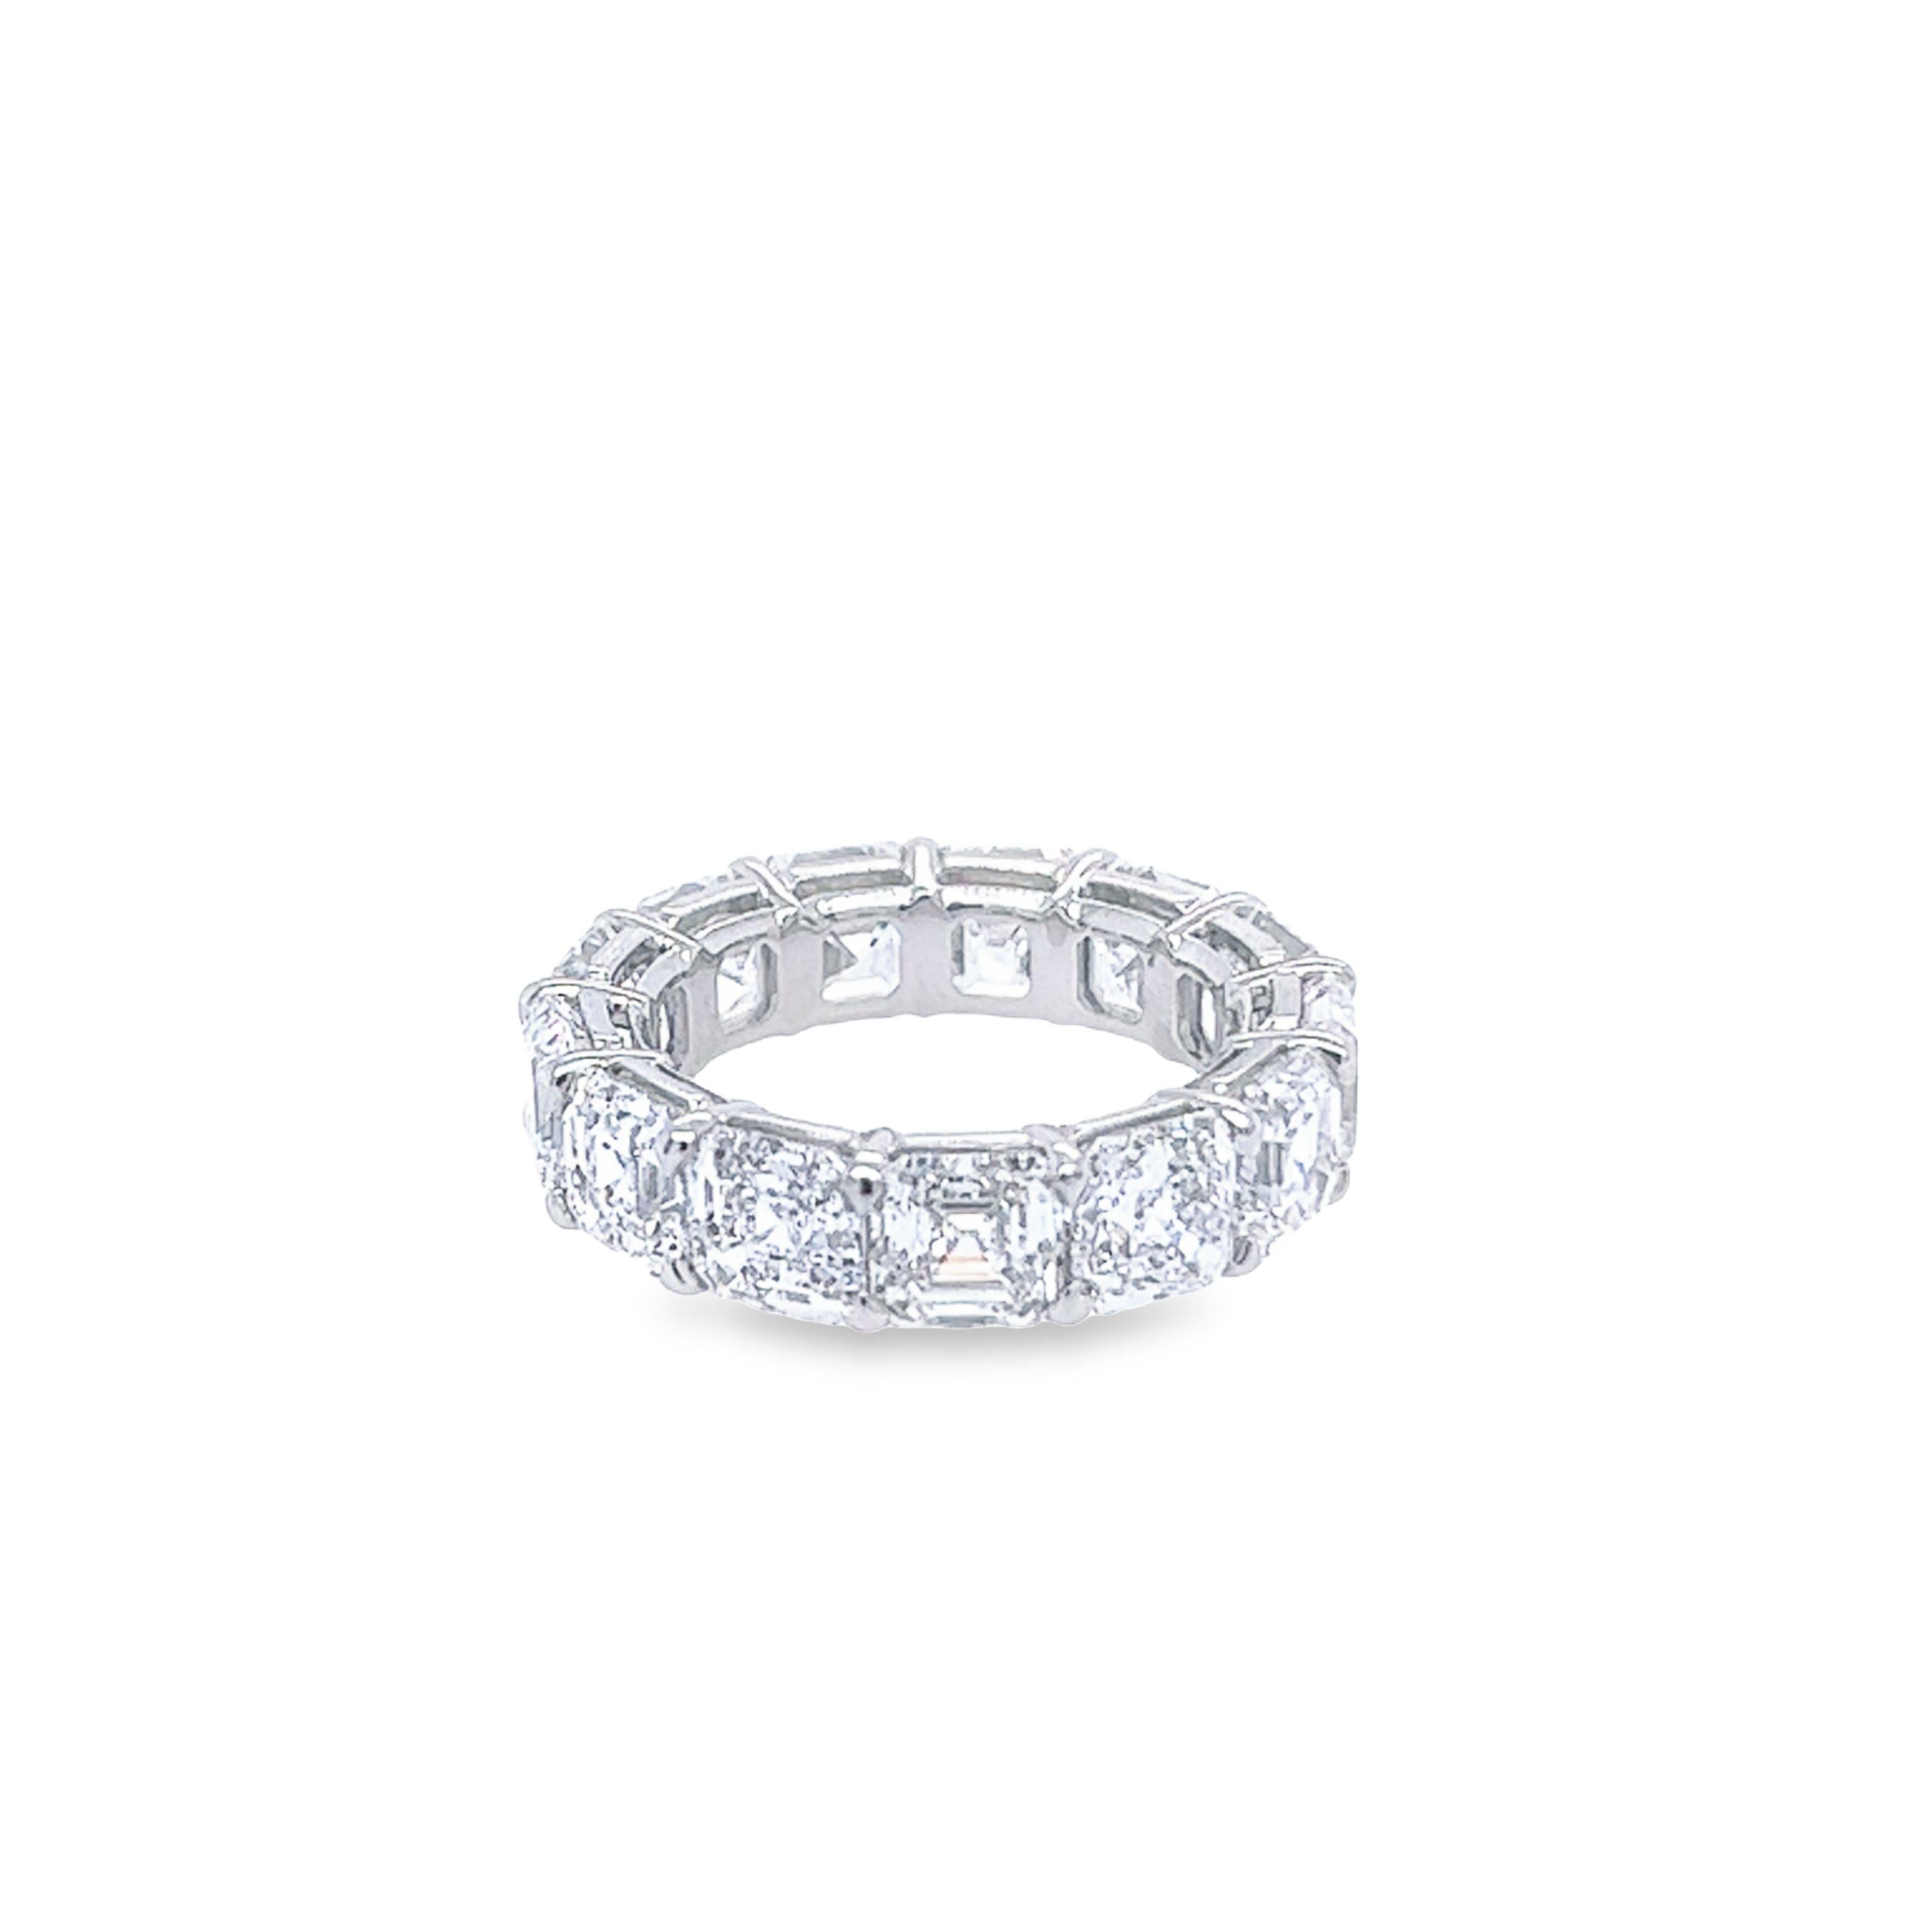 Rosenberg Diamonds & Co. 13.16 total carat weight Asscher cut diamond eternity band. This beautiful eternity band has thirteen Asscher cut diamonds ranging from D-F in color VVS1-VS2 in clarity with just over a carat each all accompanied by a GIA